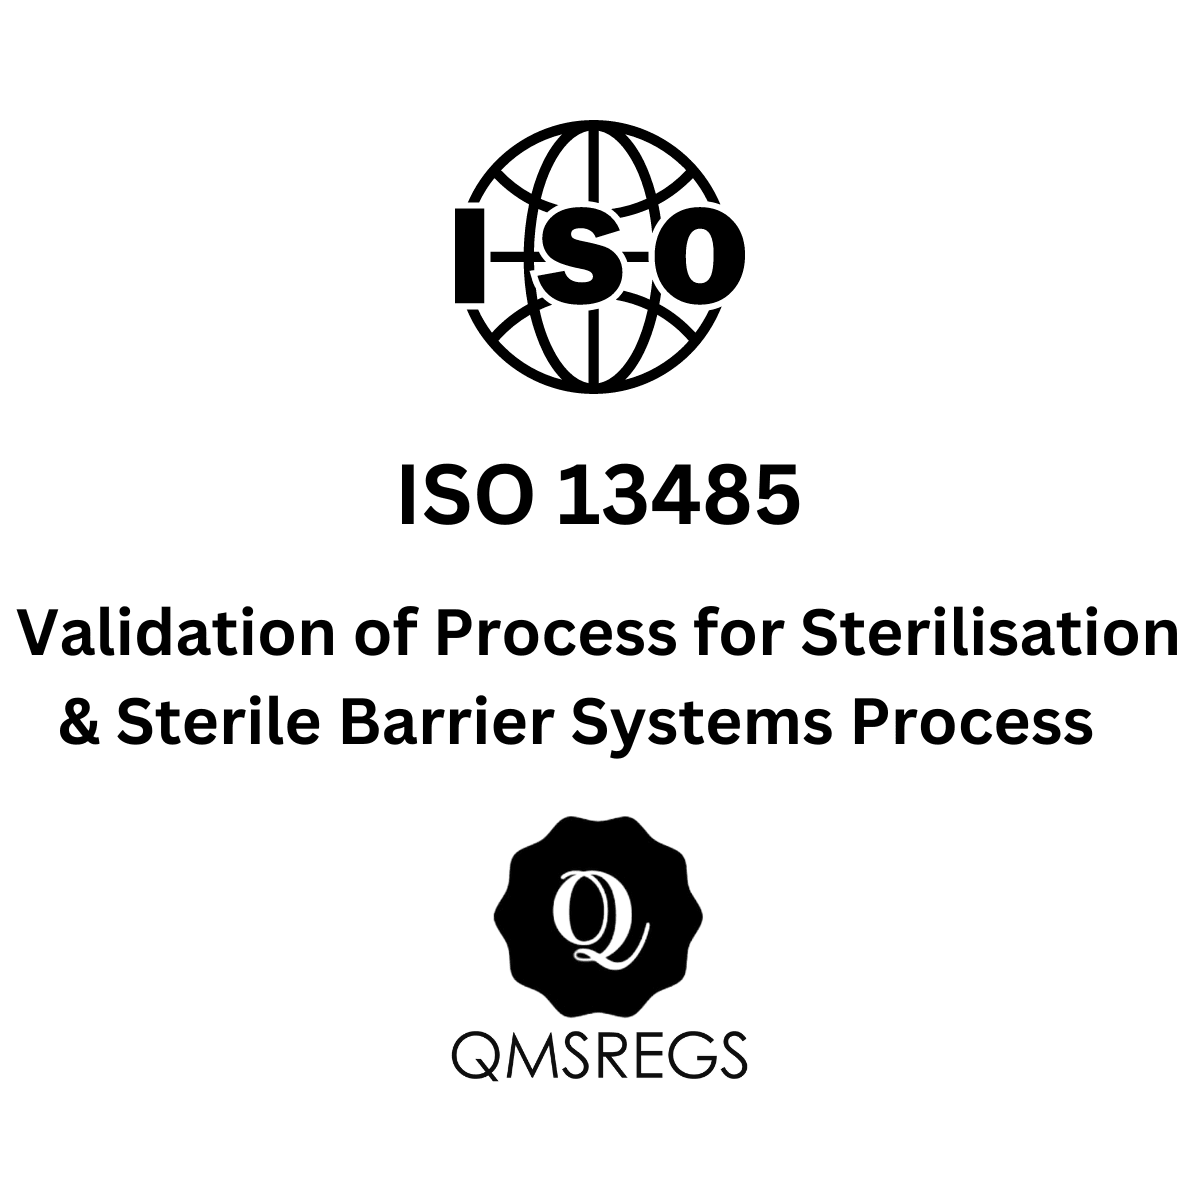 ISO 13485 Validation of Process for Sterilisation and Sterile Barrier Systems Process Template